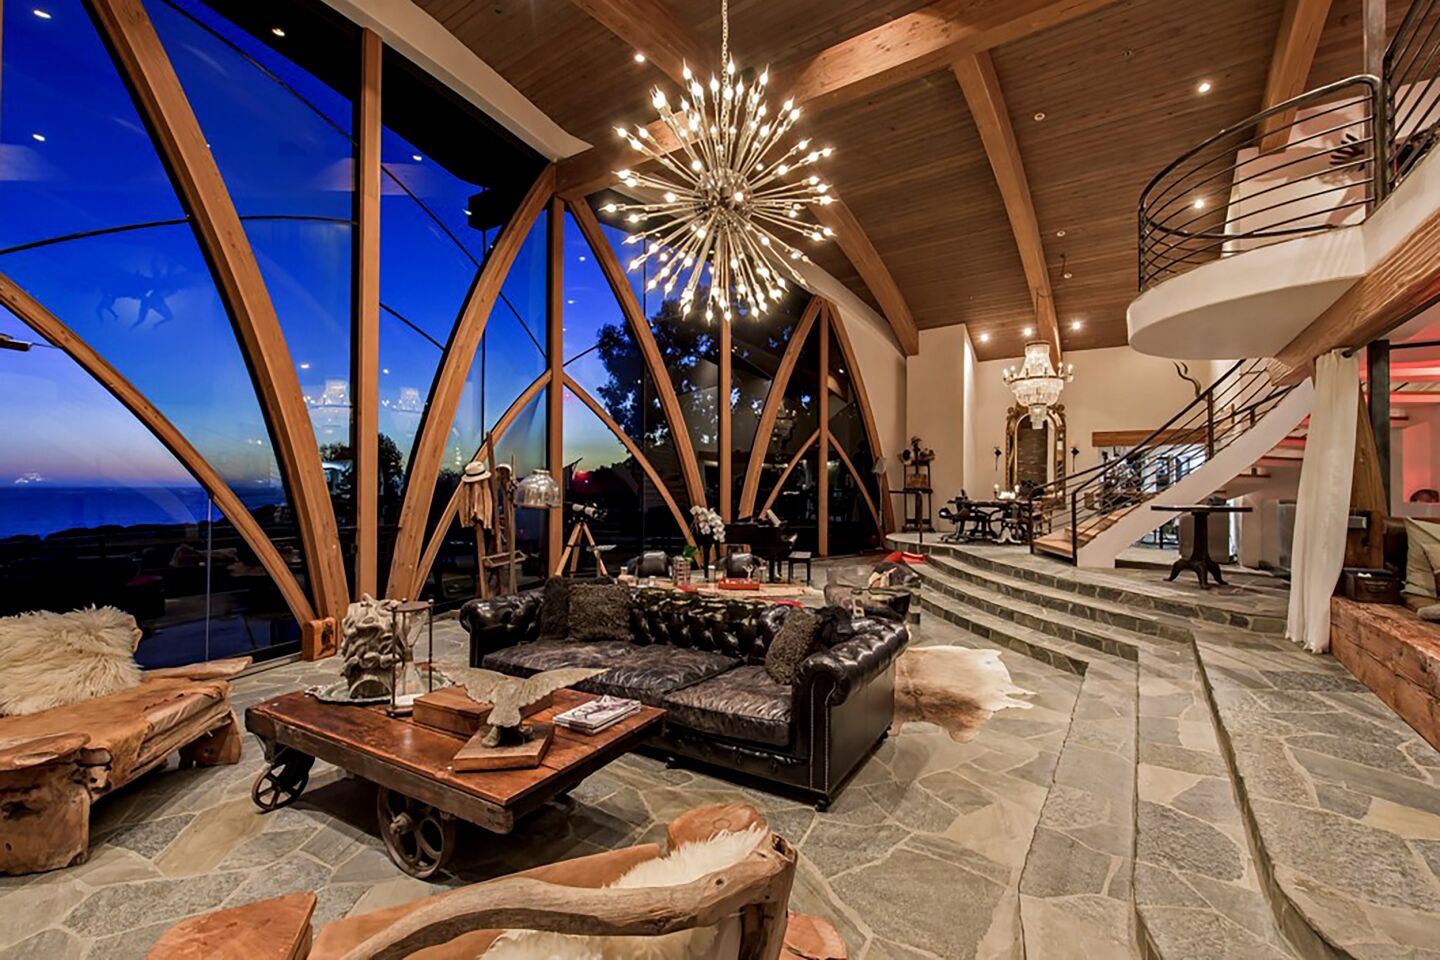 Called Ravenseye, the striking home overlooking Las Flores Beach in Malibu was built for Jerome Lawrence after the playwright's previous home was destroyed by wildfire.